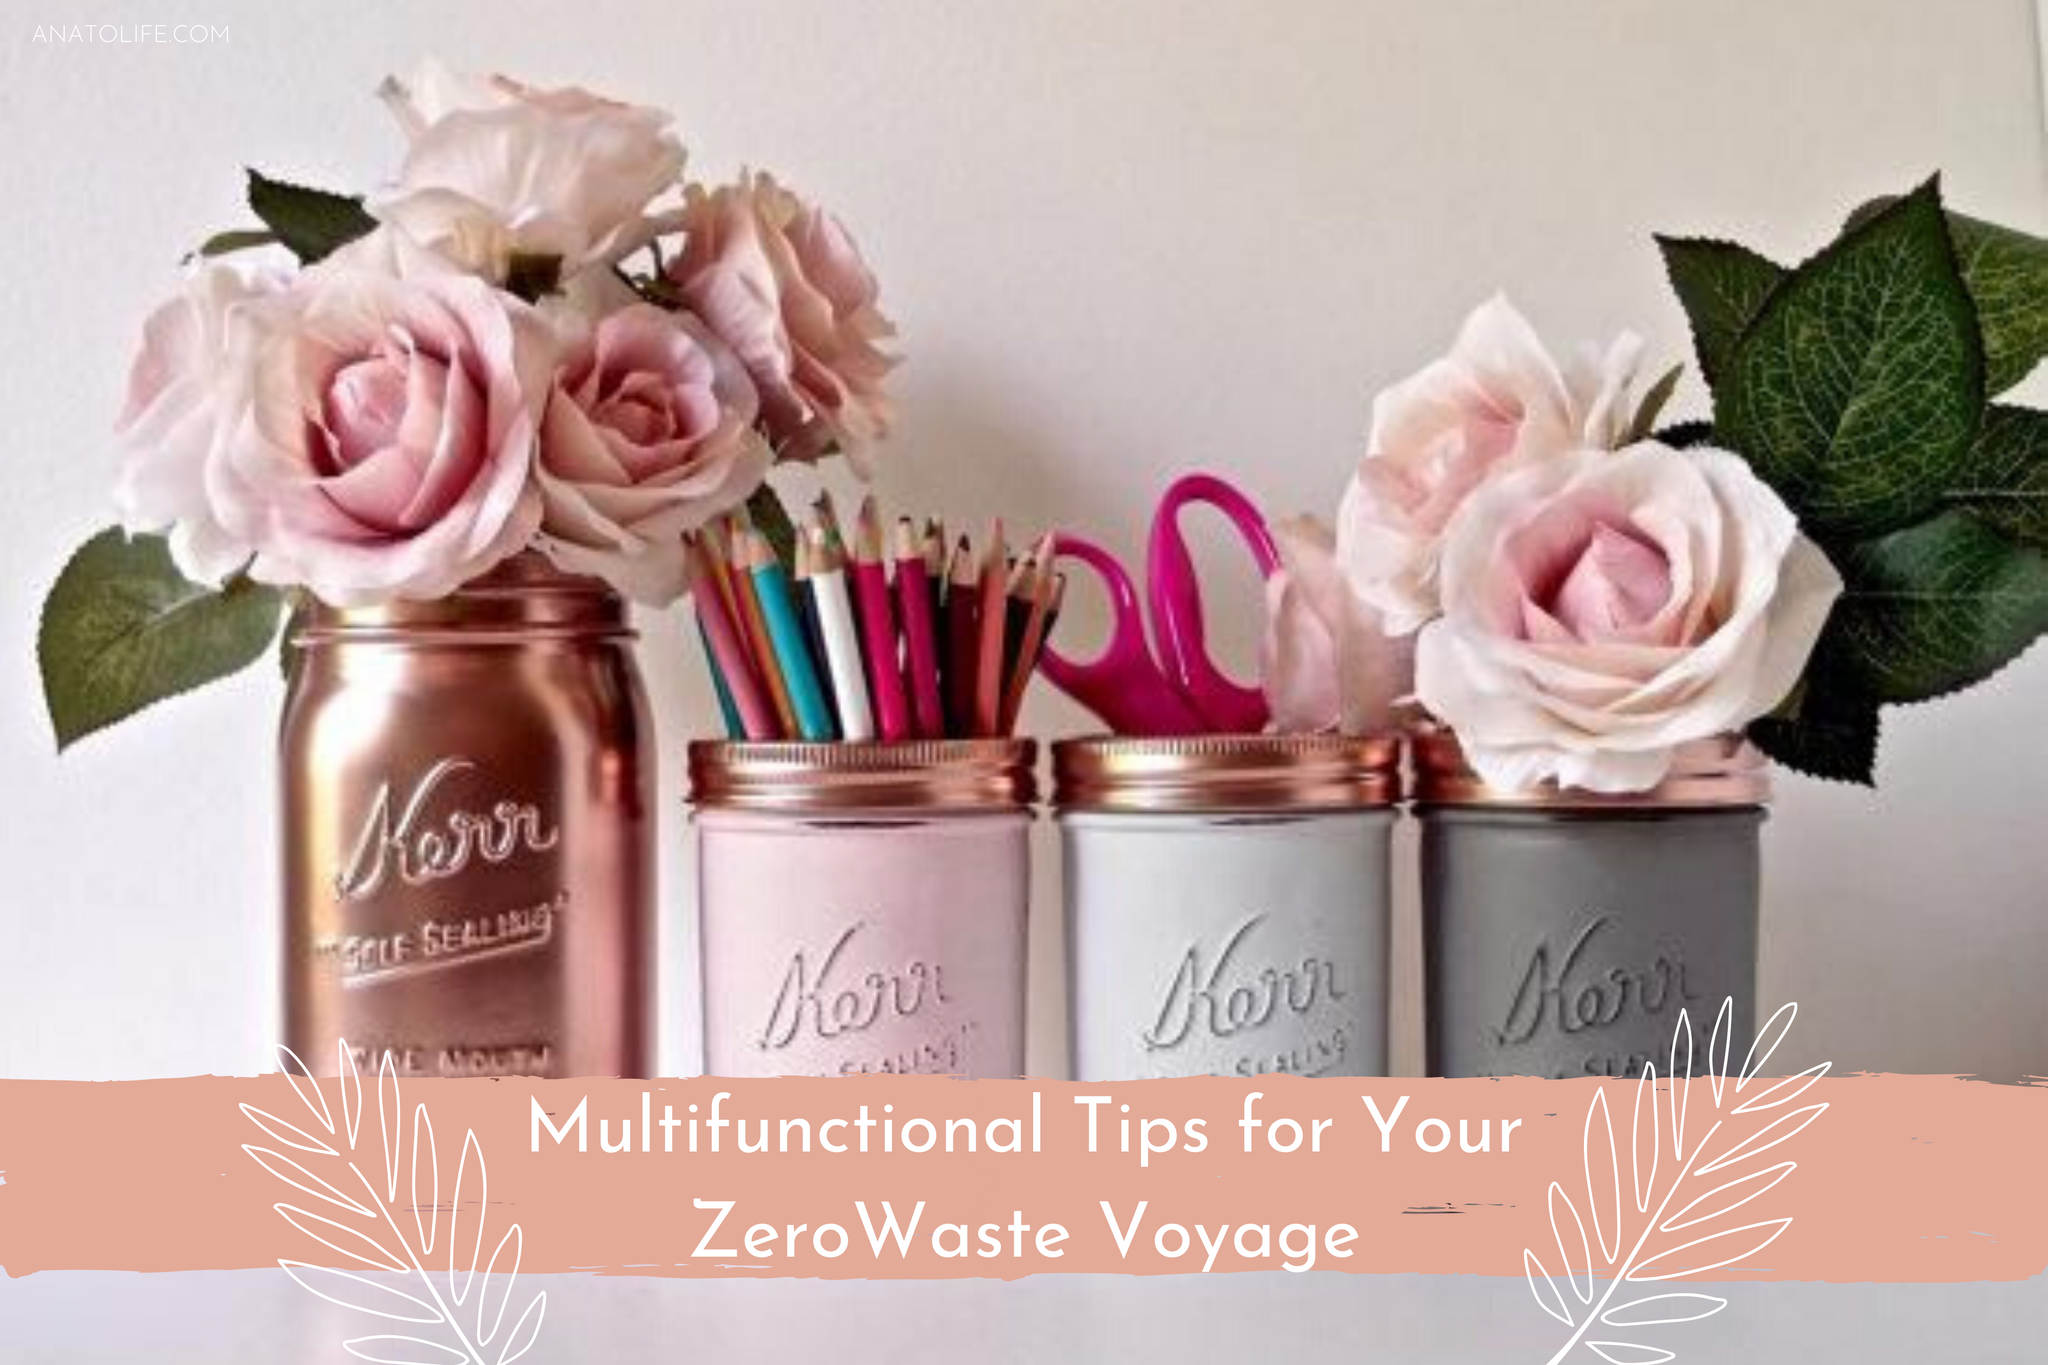  Multifunctional tips for your zero-waste voyage by Anato Regenerative Skincare